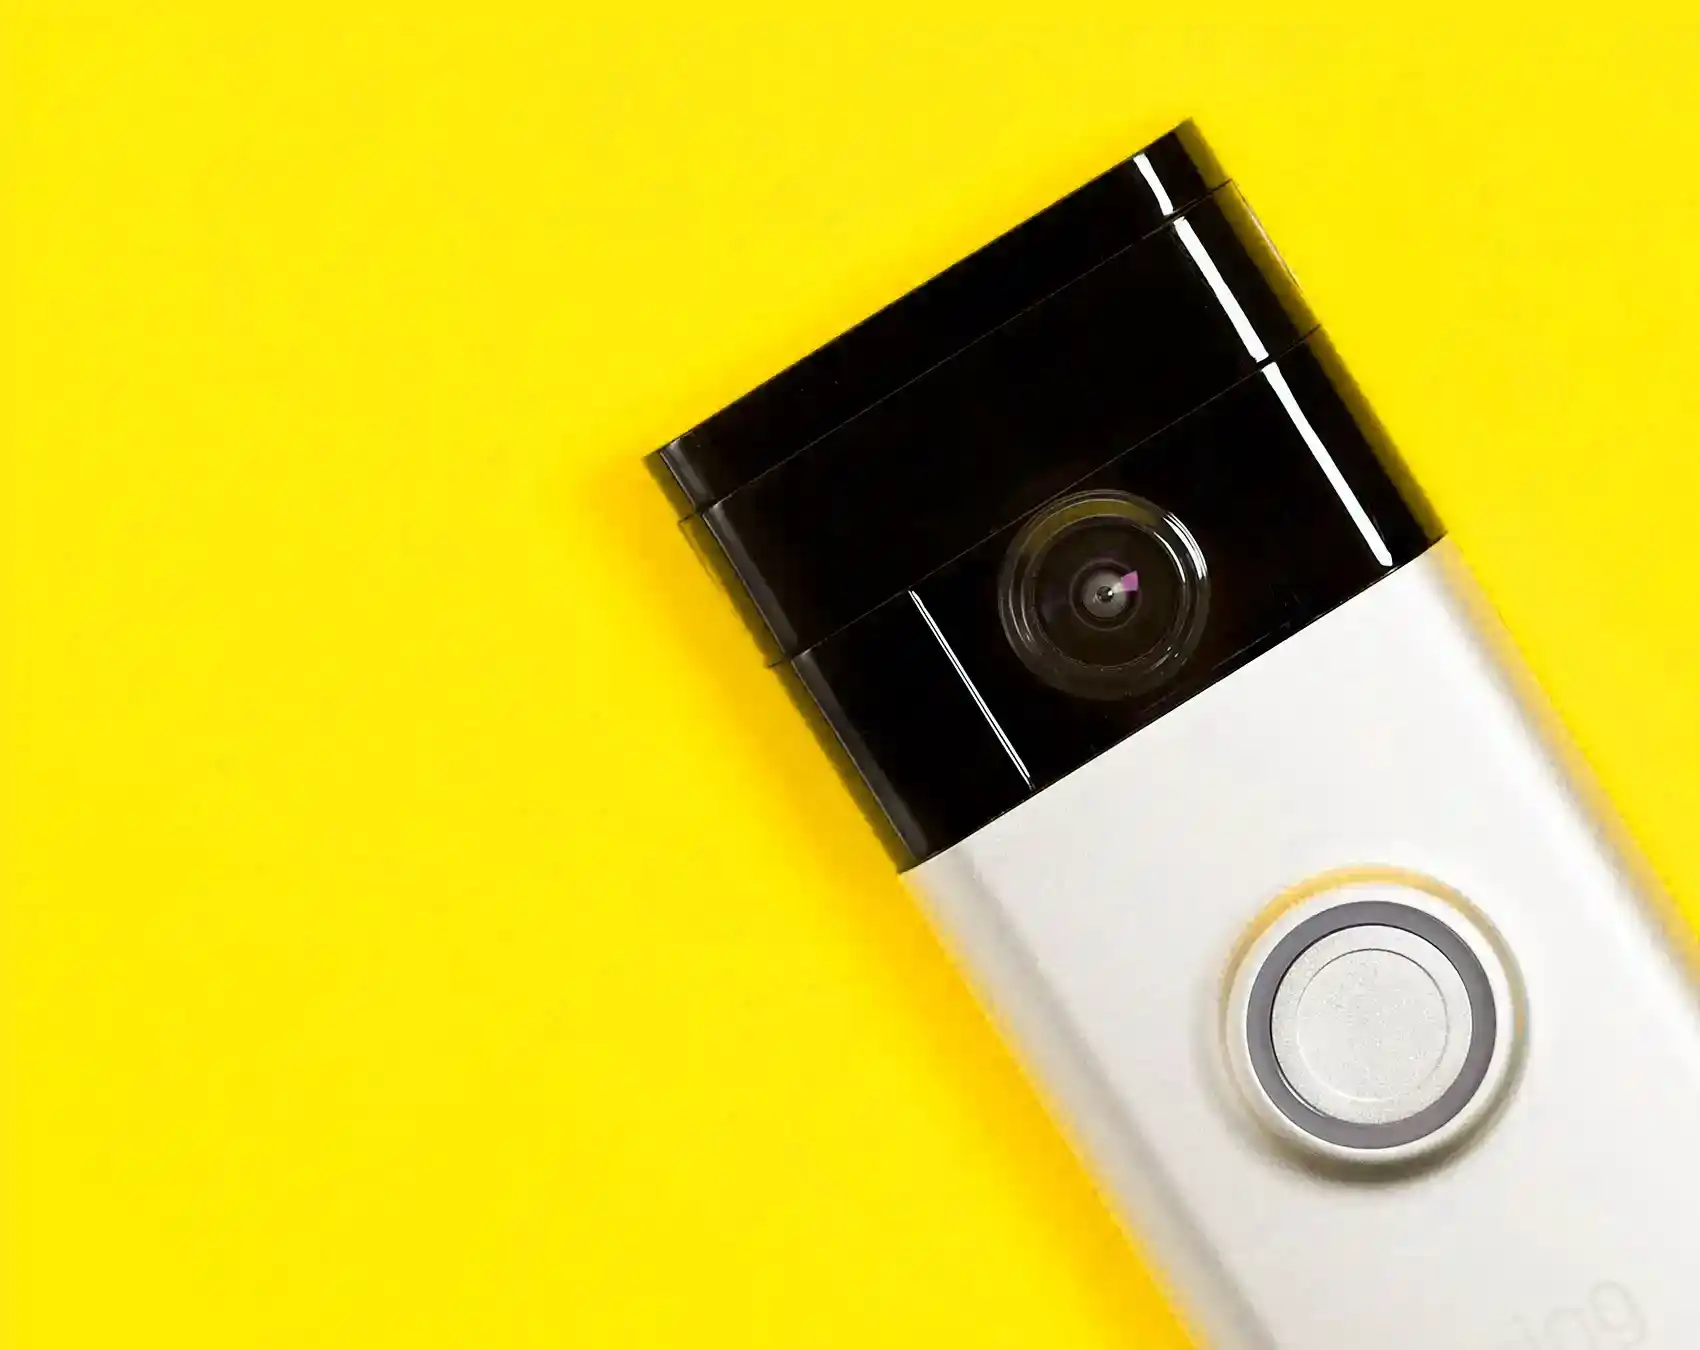 Ring Doorbell on a yellow background 1.0